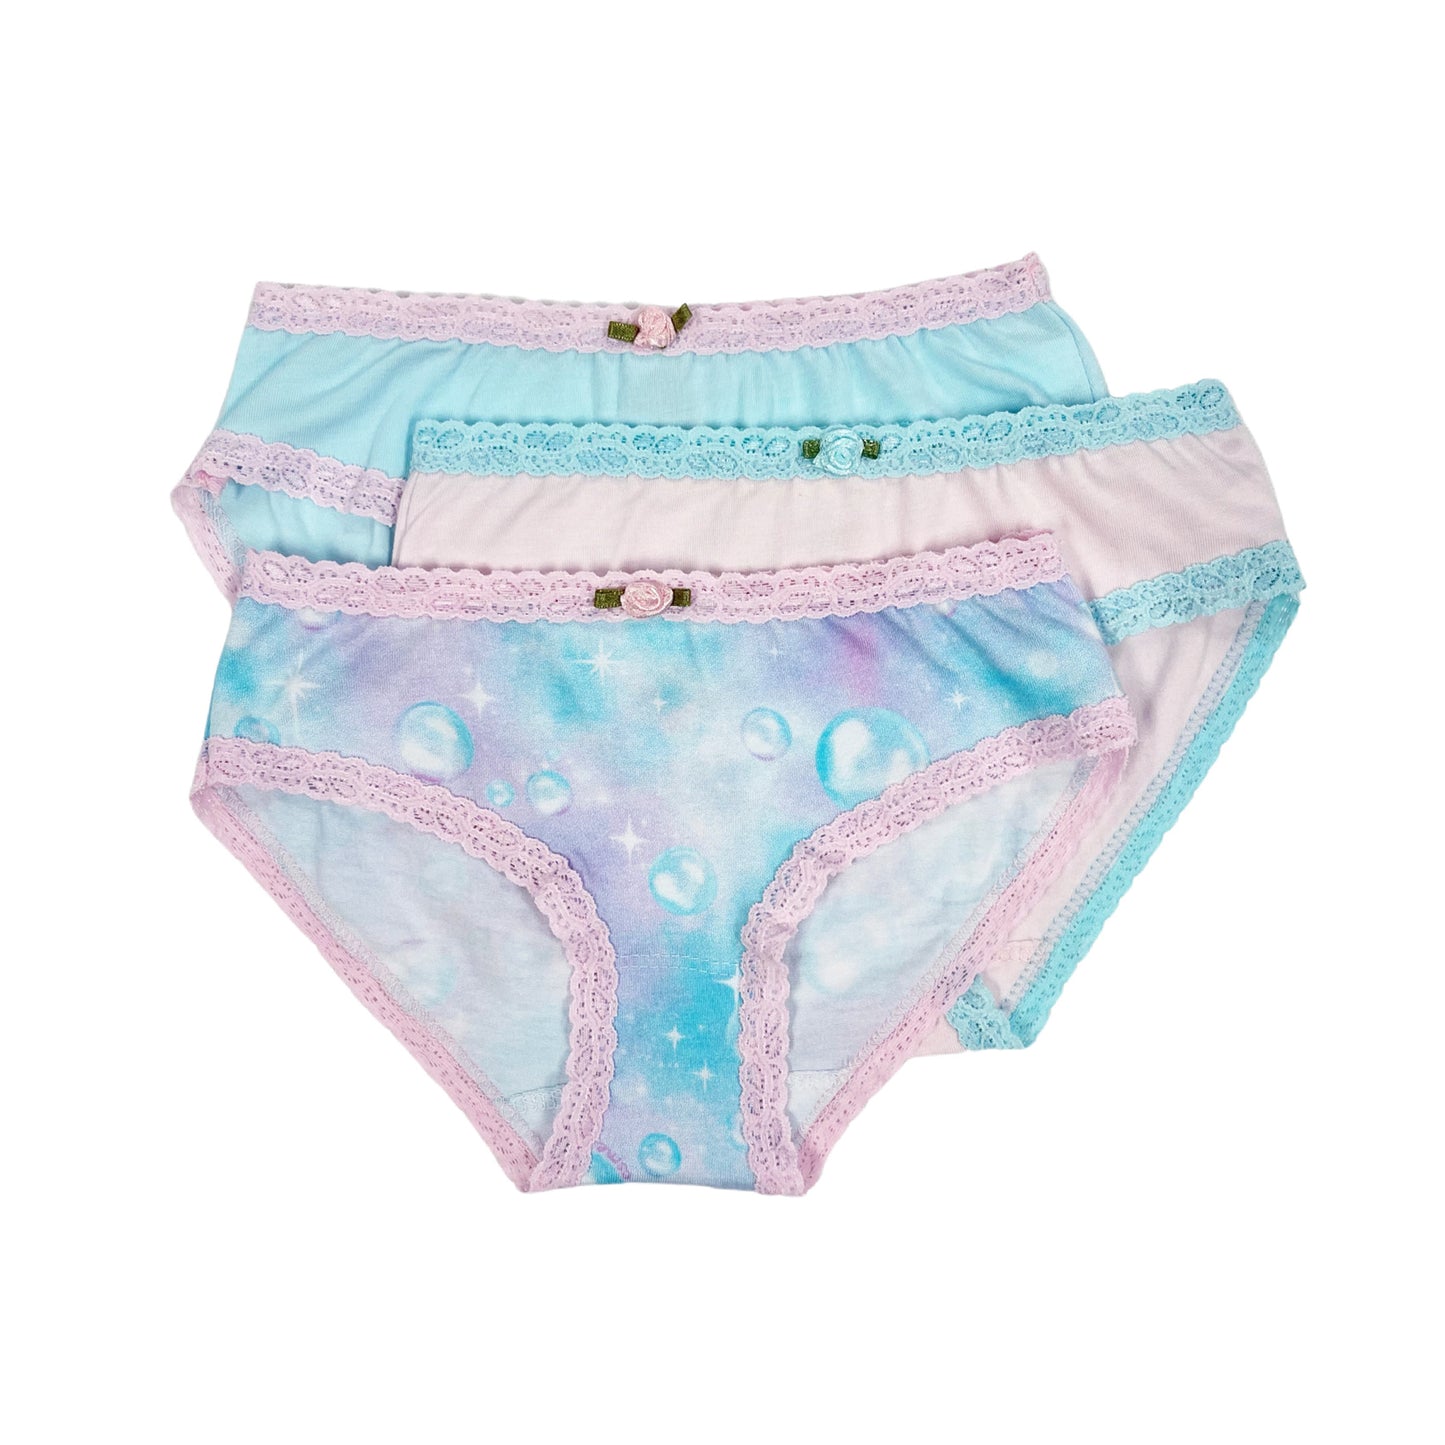 U20 Esme Girl's 3-Pack Panty Cotton Candy, Sweet Space, Tie Dye Star, Happy  Face